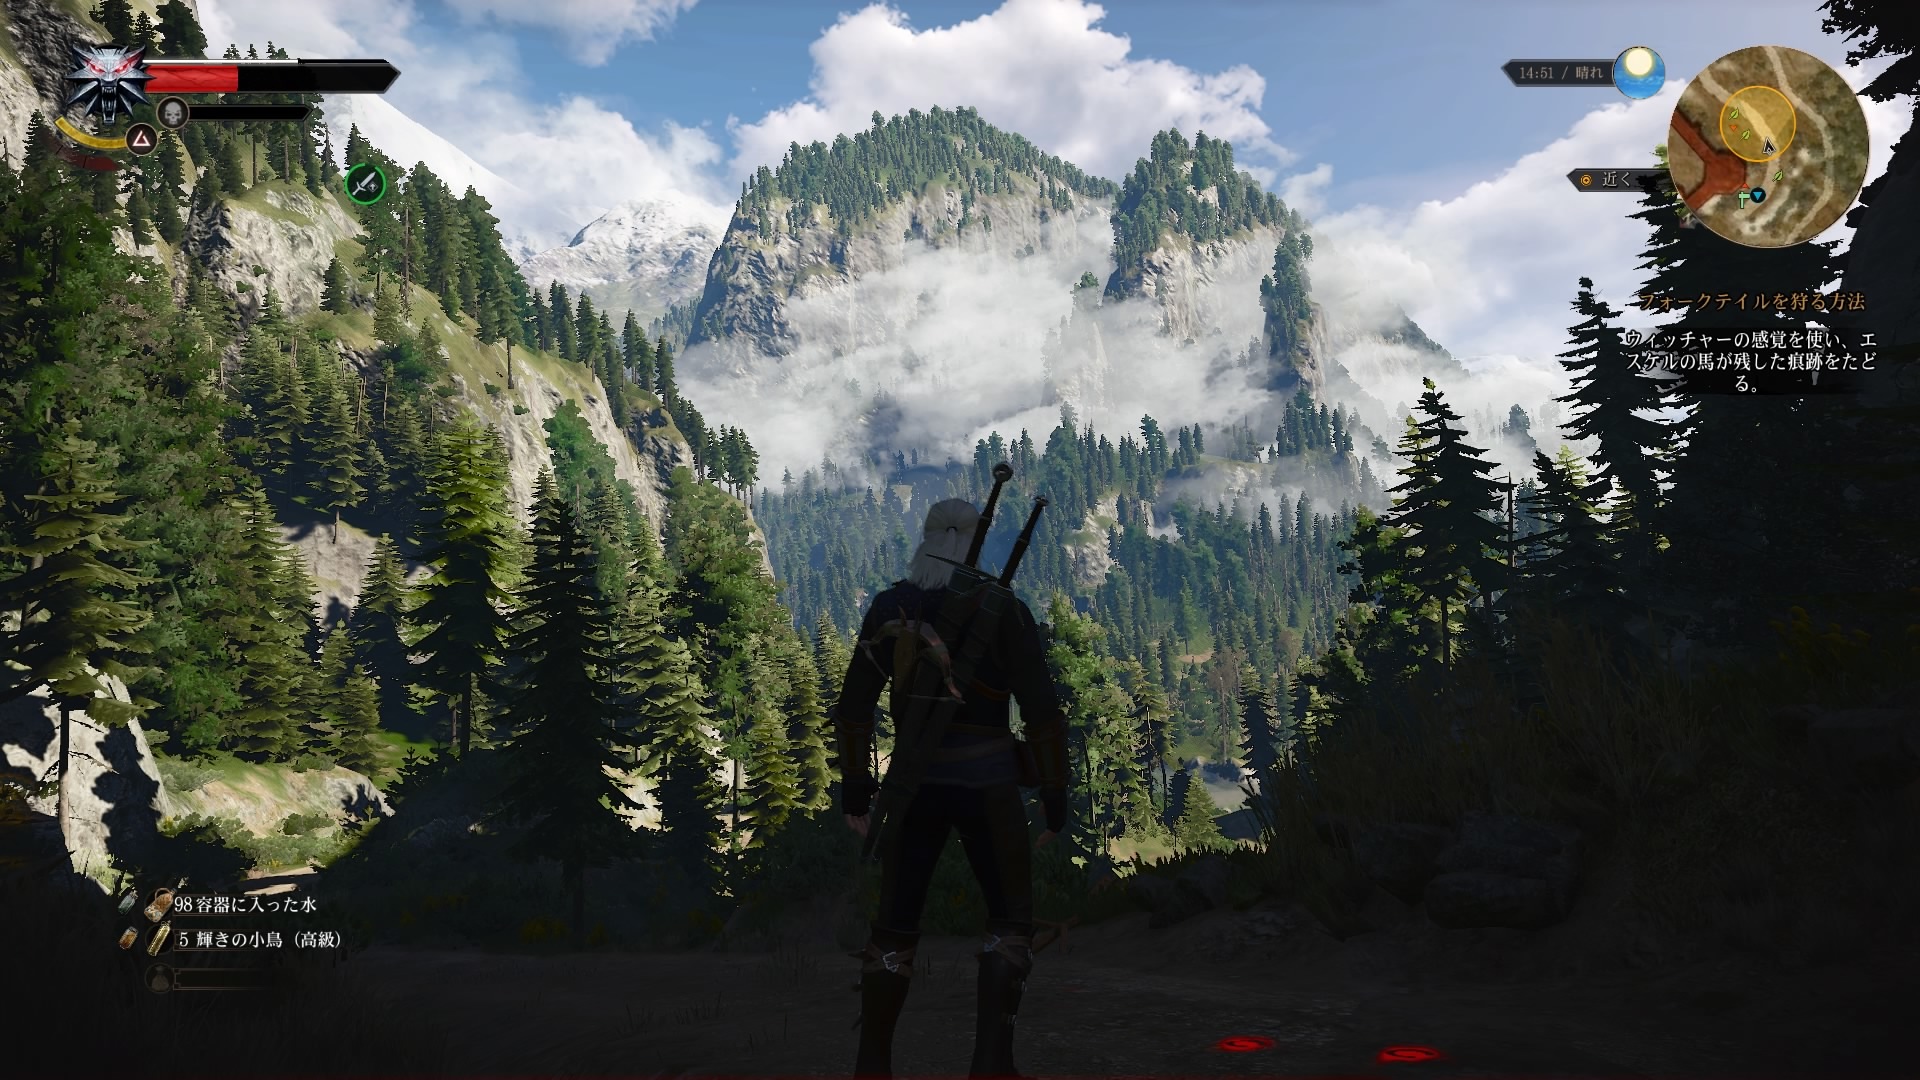 The Witcher 3 15 ケィア モルヘンに到着 The Witcher 3